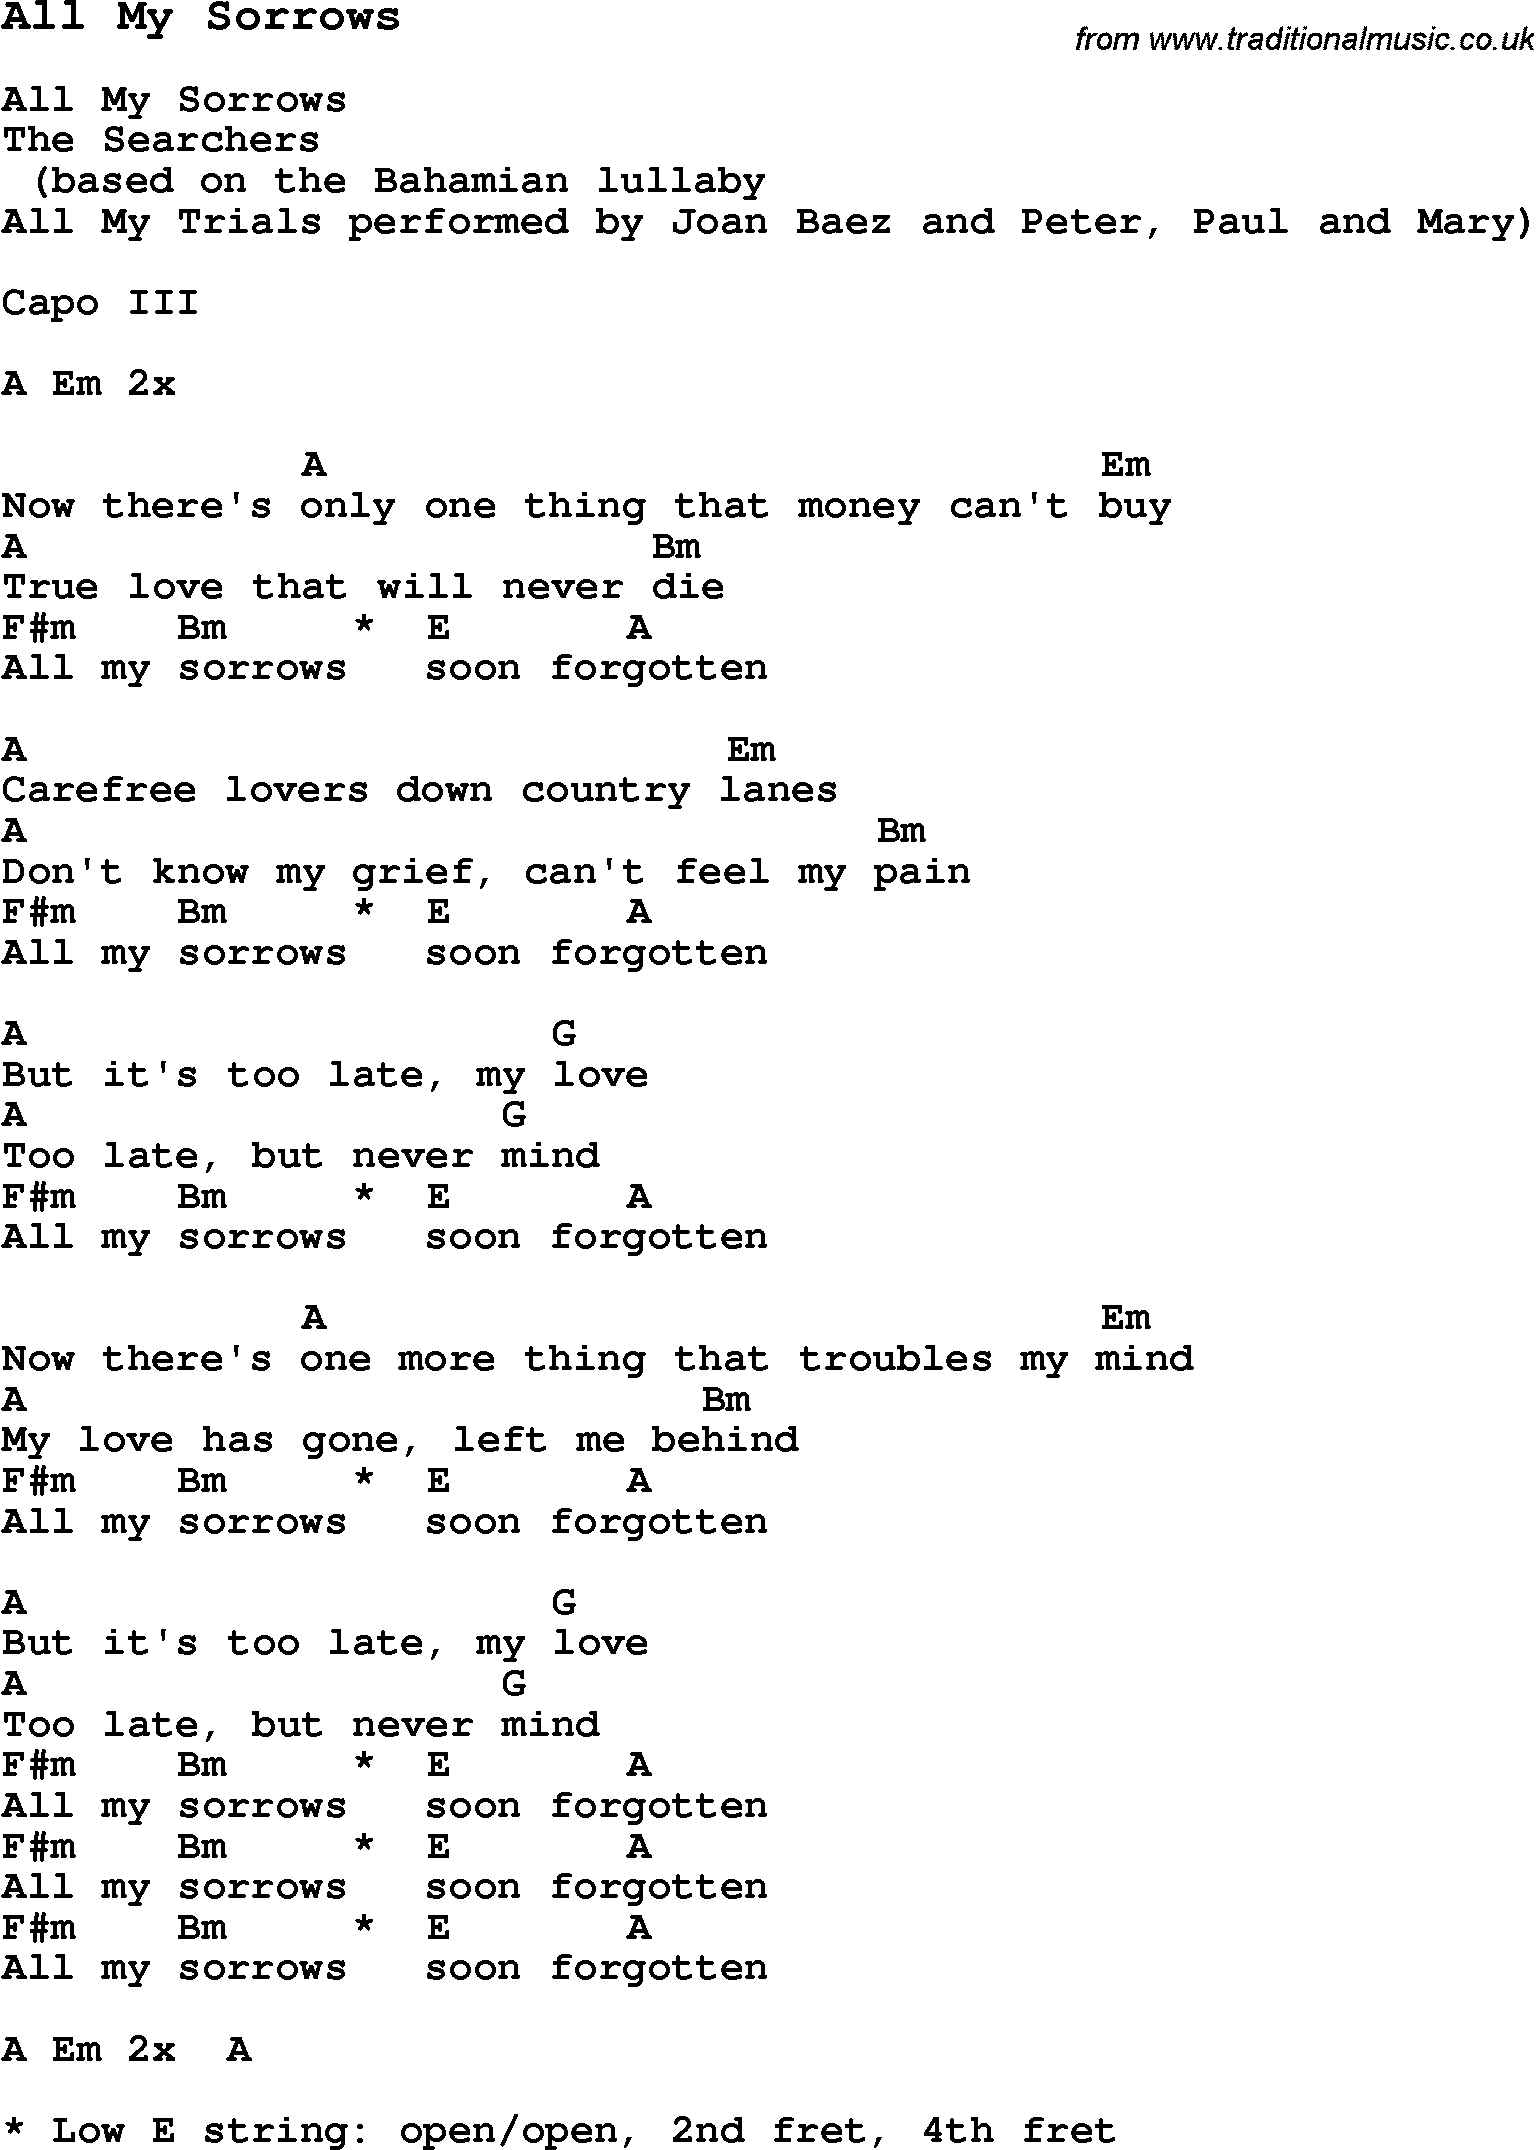 Traditional Song All My Sorrows with Chords, Tabs and Lyrics